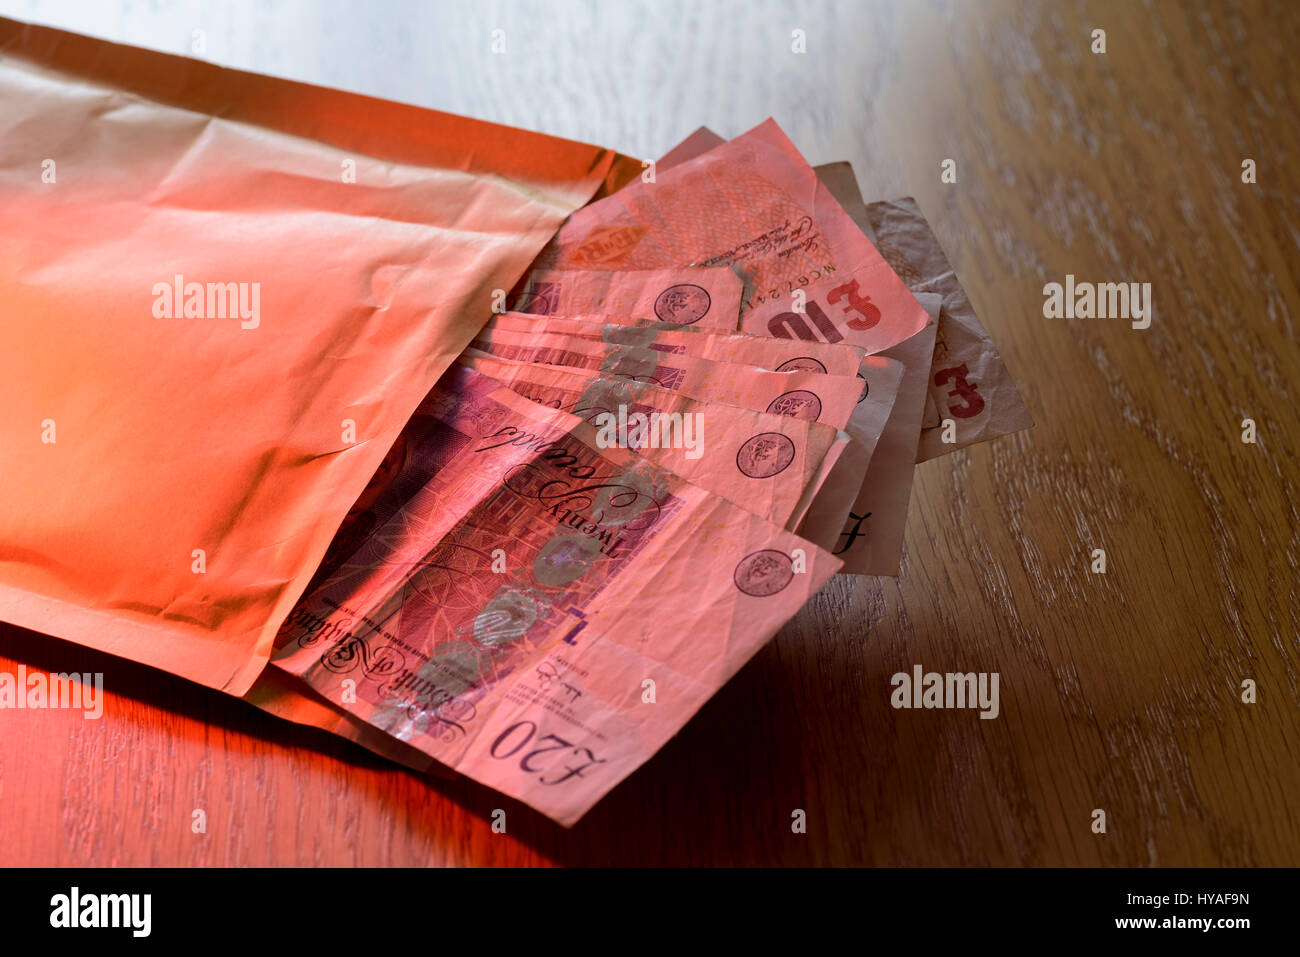 Brown envelope stuffed full of cash. Pay off or bribe with a bundle of cash. Stock Photo